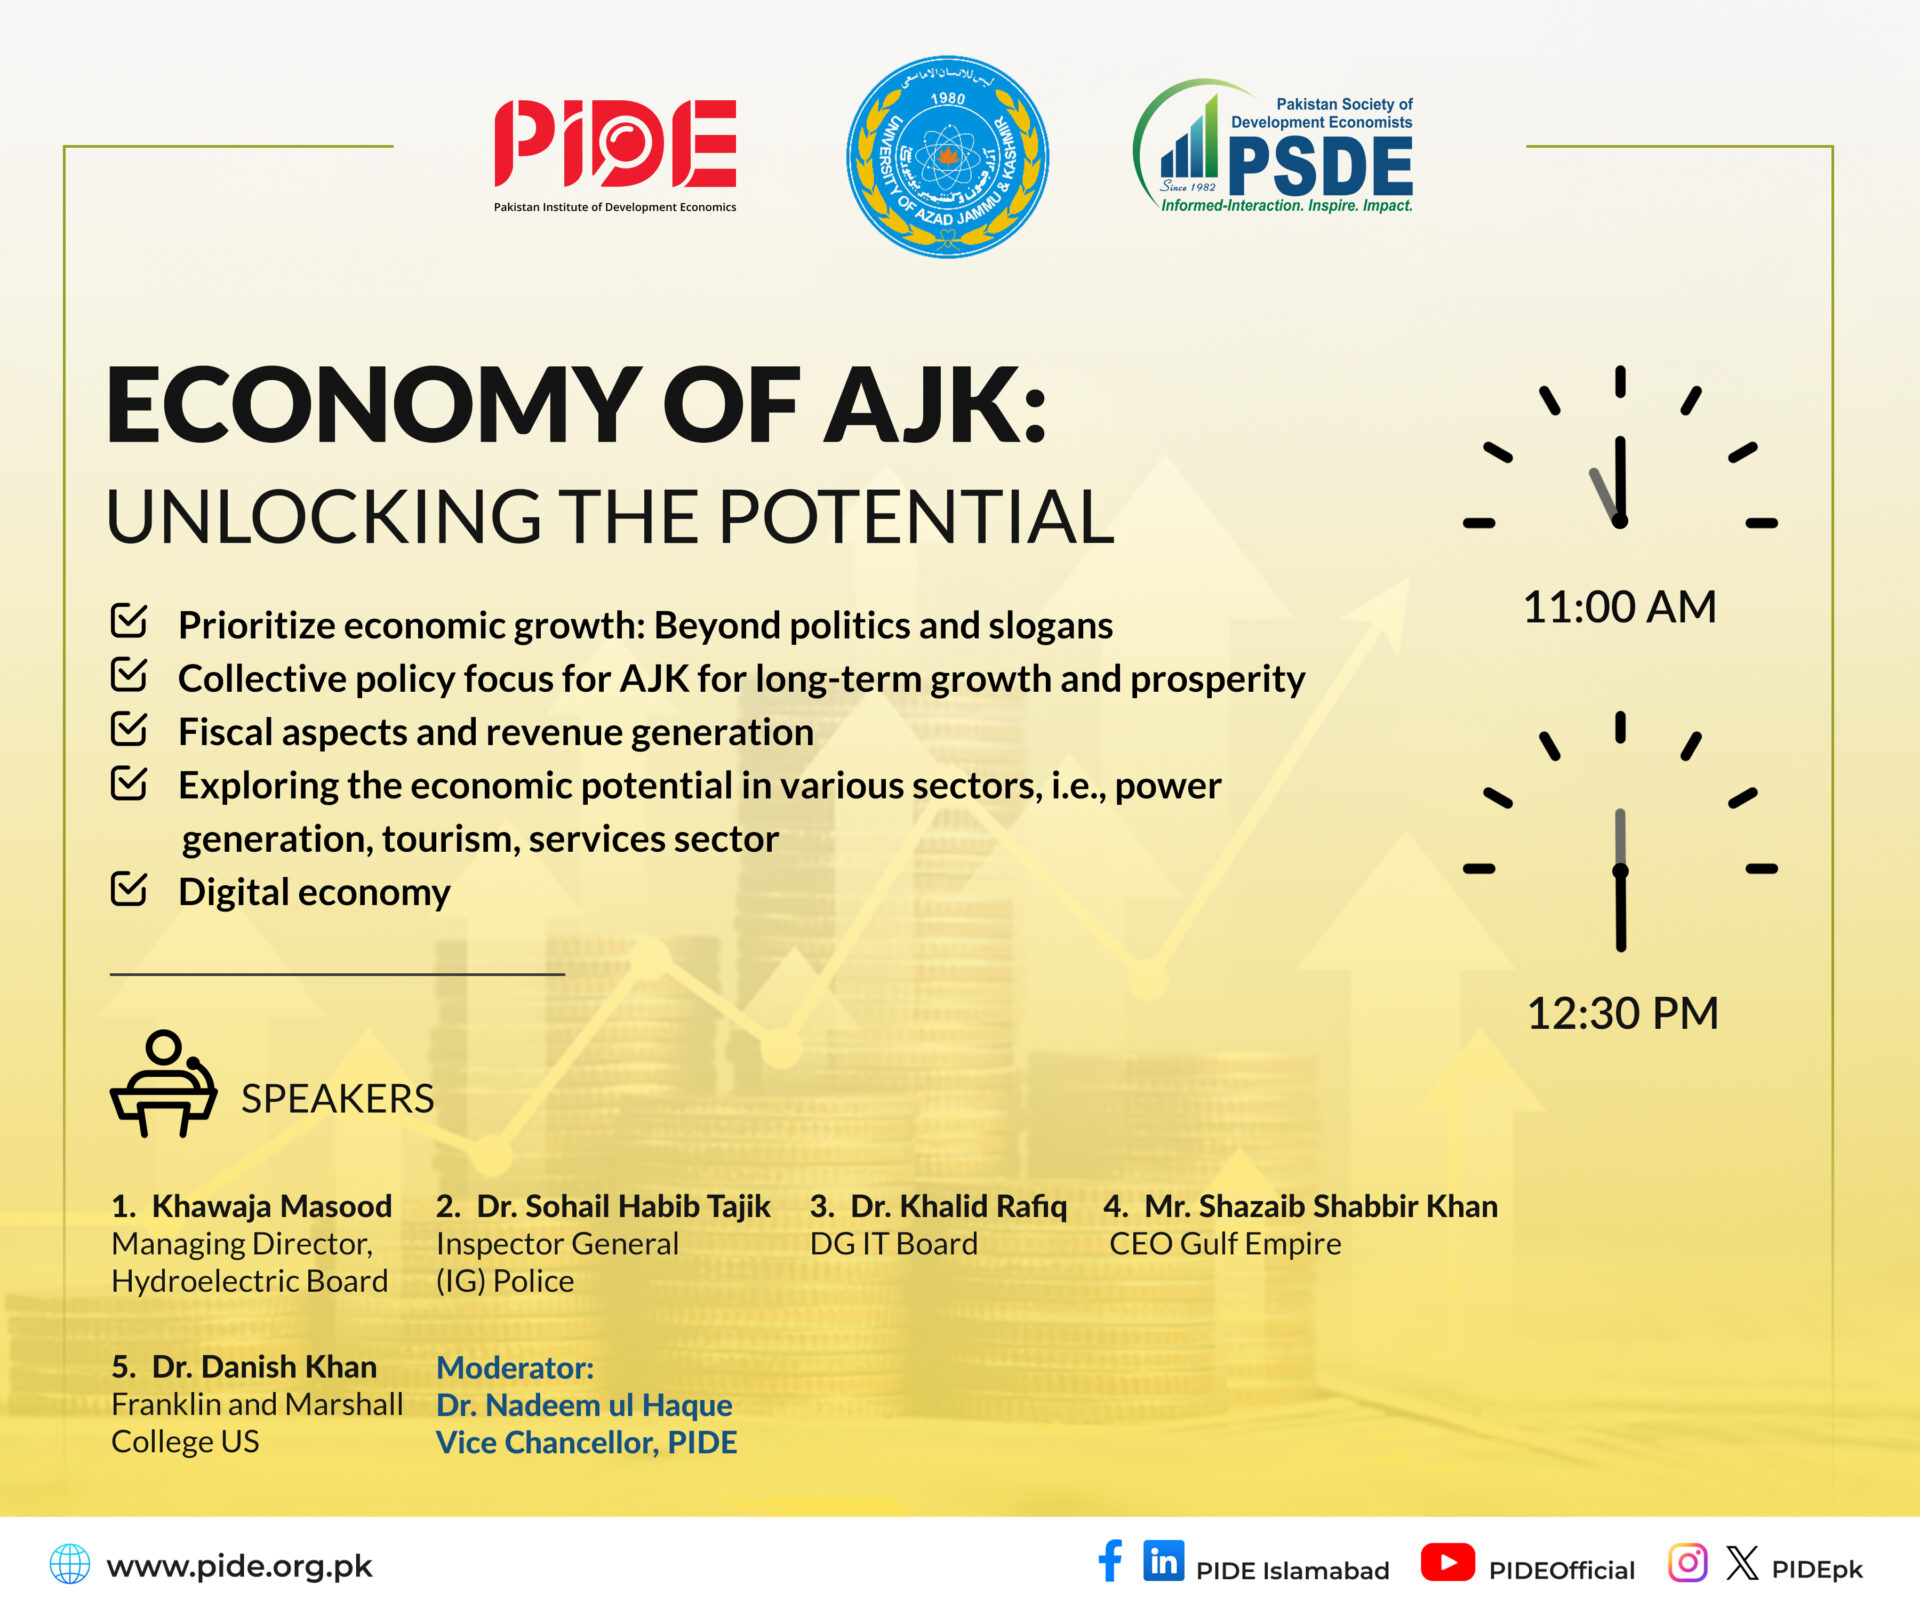 Economy of AJK, Unlocking the Potential 11 to 12.30